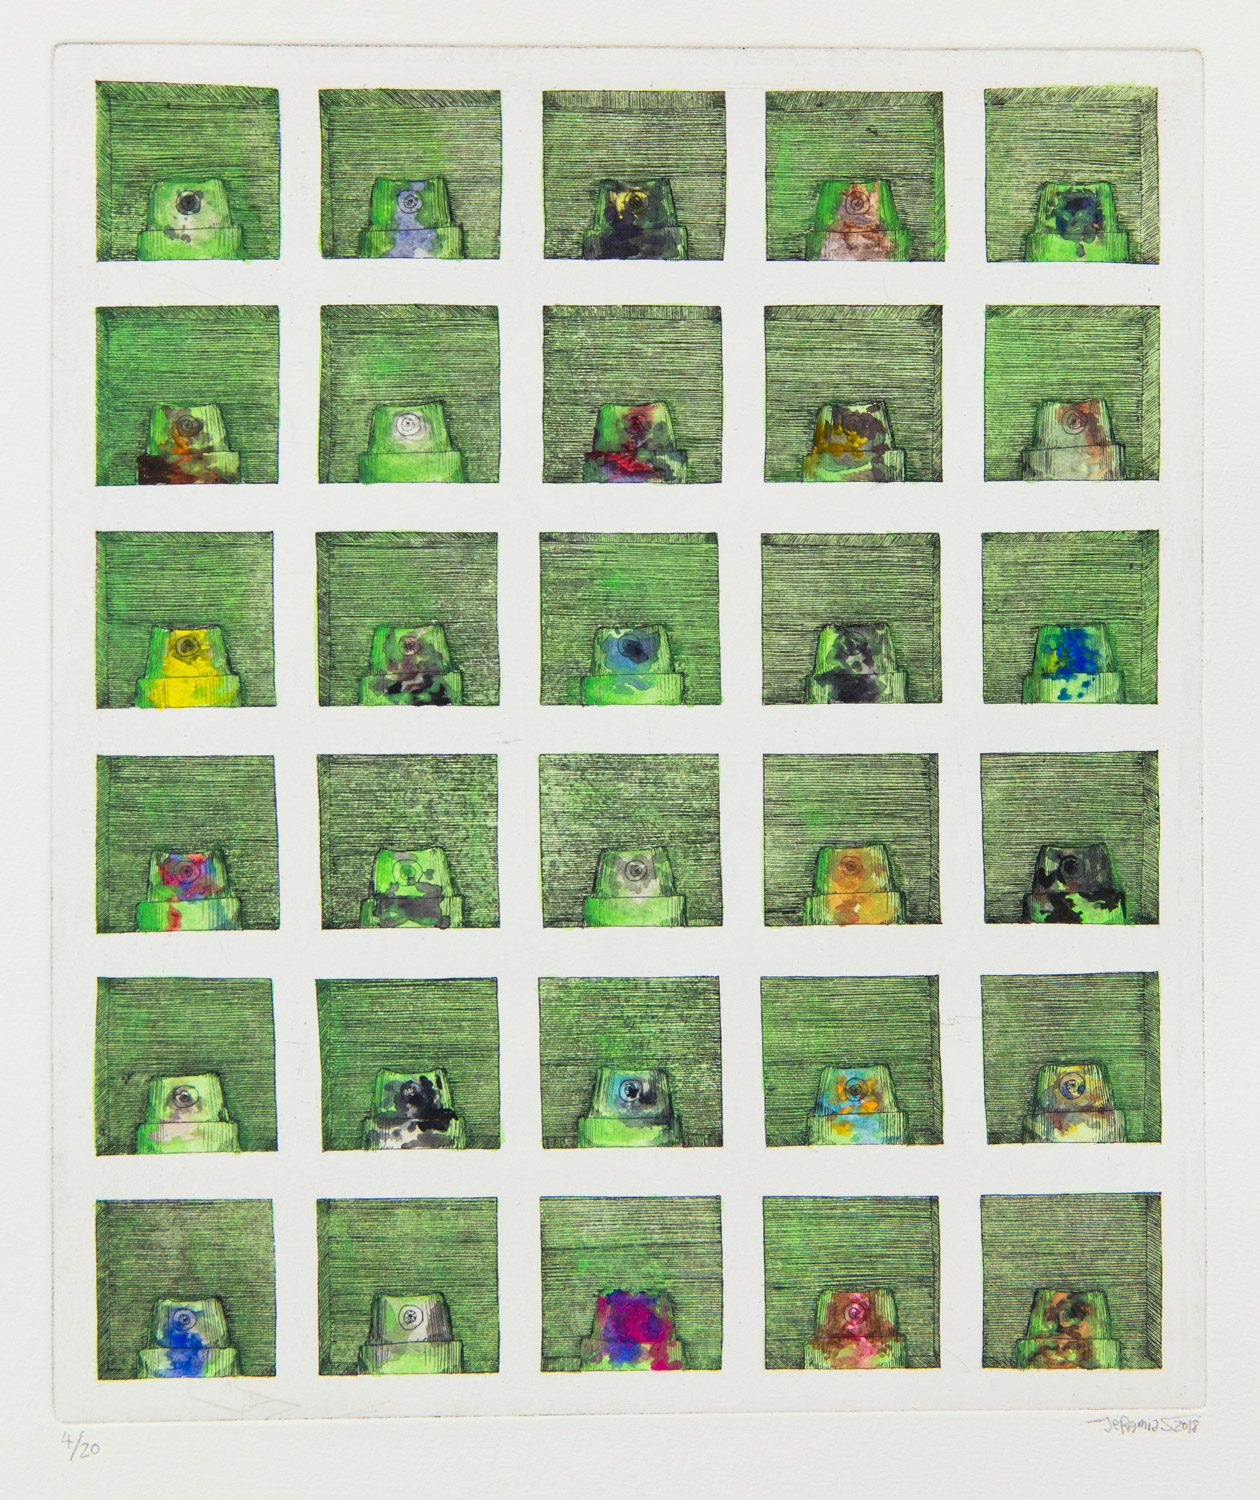 Nozzlebox 2D; Etching on Chest; plate size 26 x 31 cm, paper size 39 x 52 cm; edition 20; each page hand-coloured; 2018